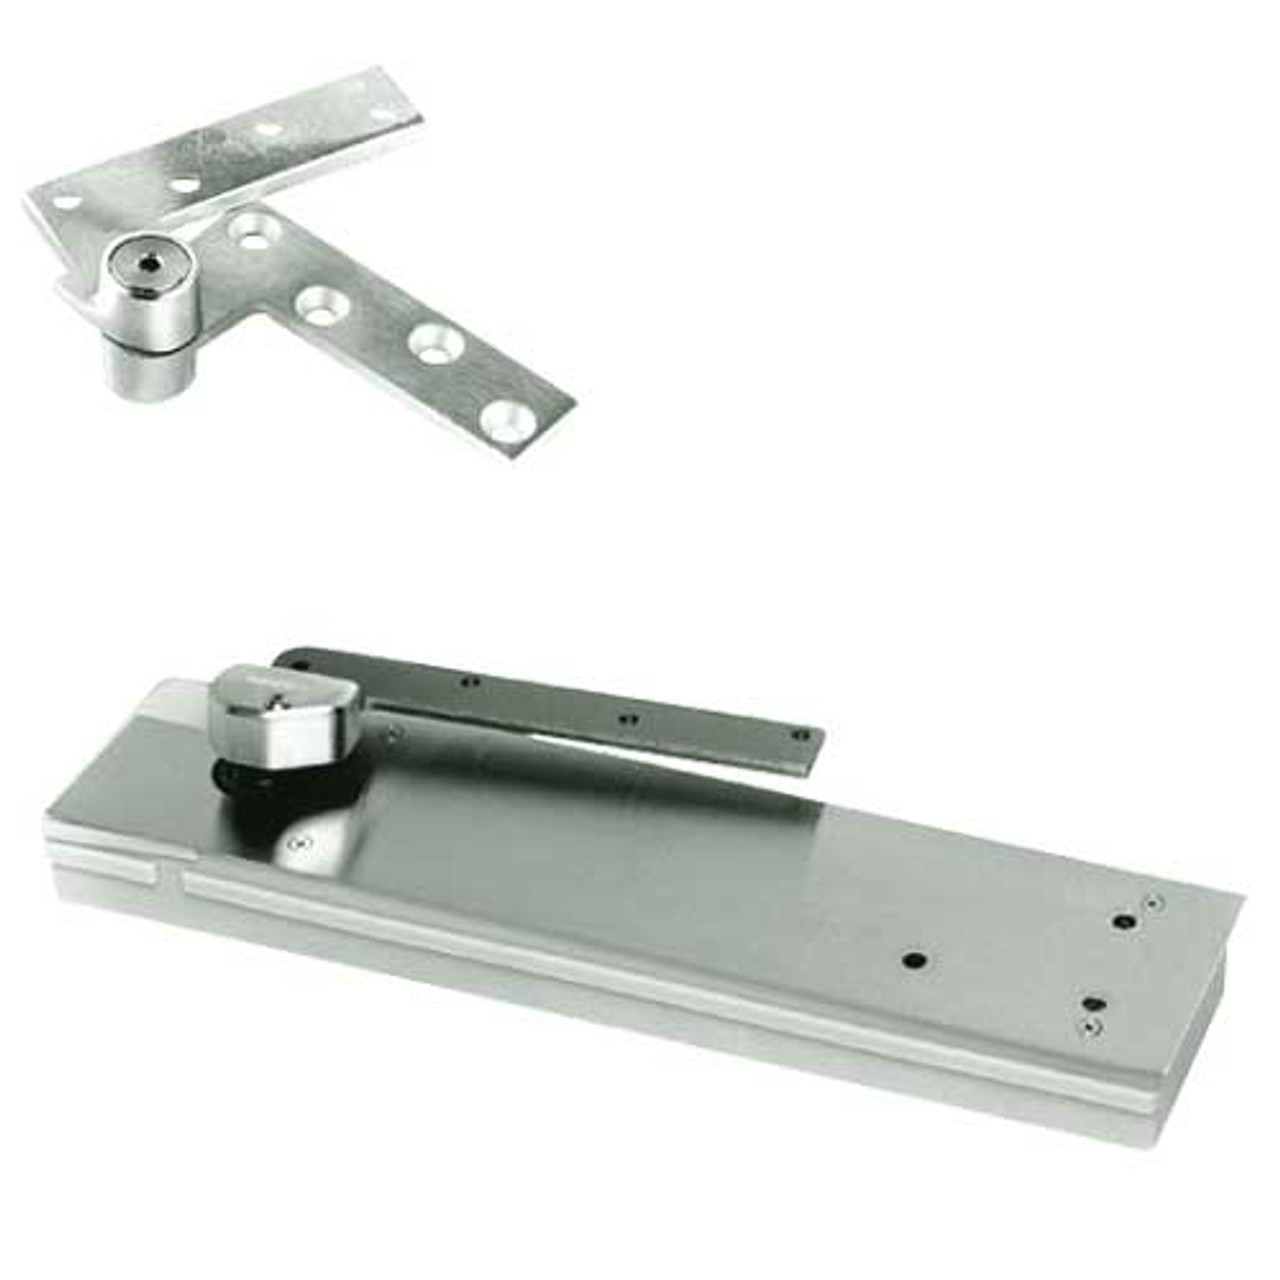 5103ABC180-1-1/2OS-LFP-RH-618 Rixson 51 Series 1-1/2" Offset Hung Shallow Depth Floor Closers in Bright Nickel Finish